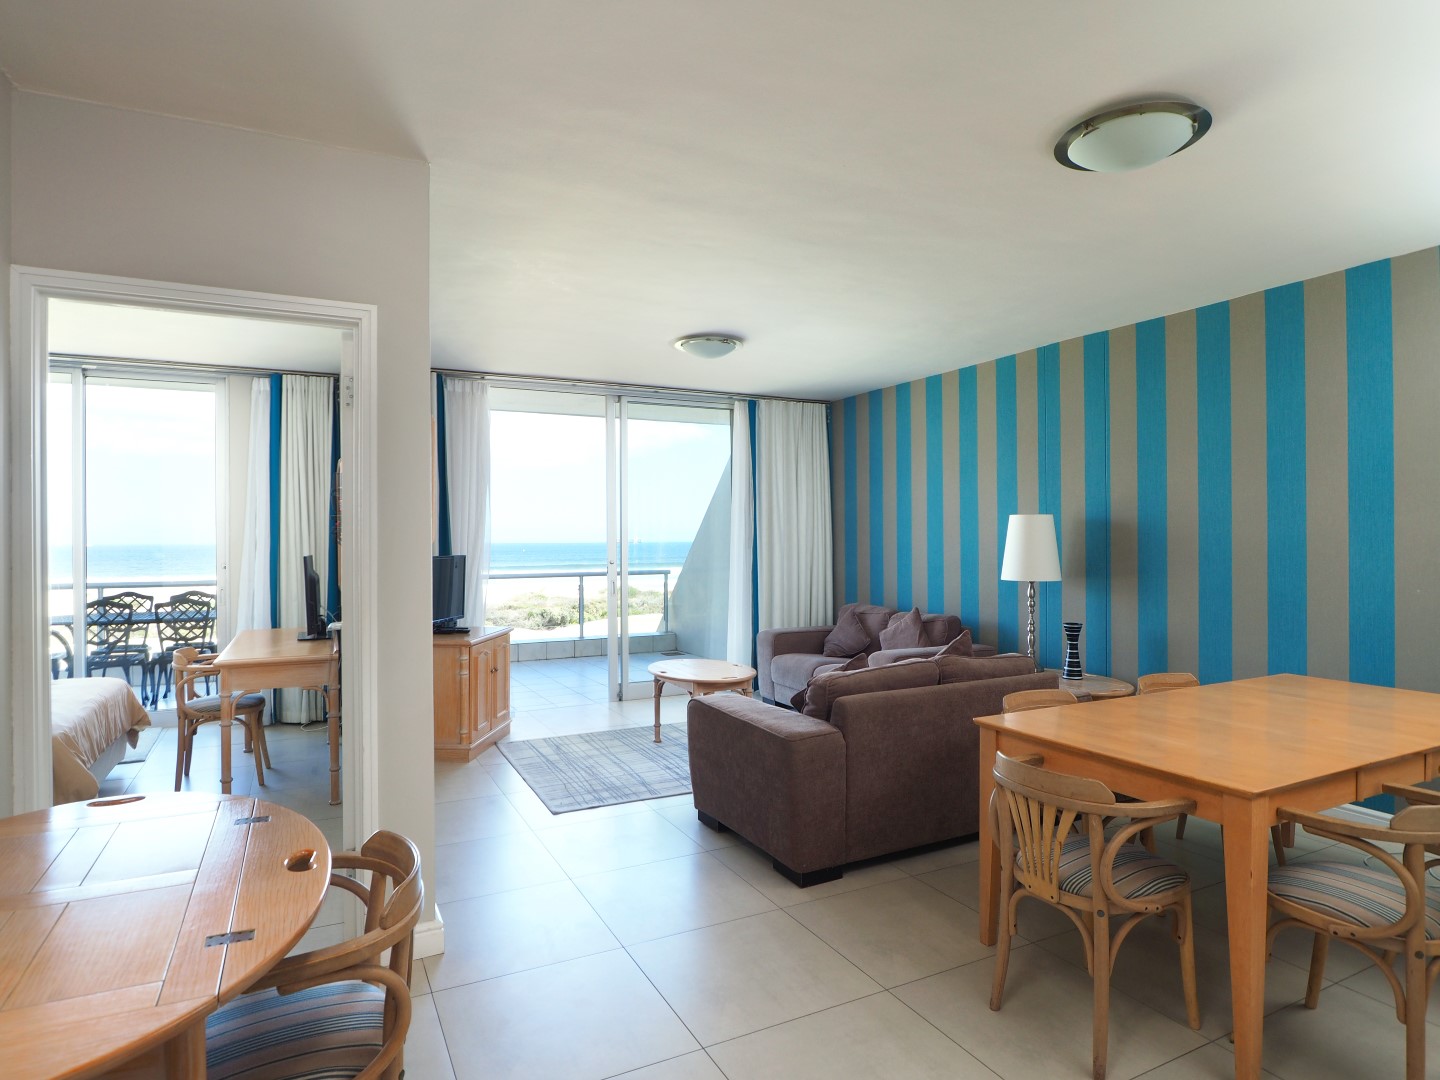 Photo 8 of Dolphin Beach Beauty accommodation in Bloubergstrand, Cape Town with 3 bedrooms and 2 bathrooms